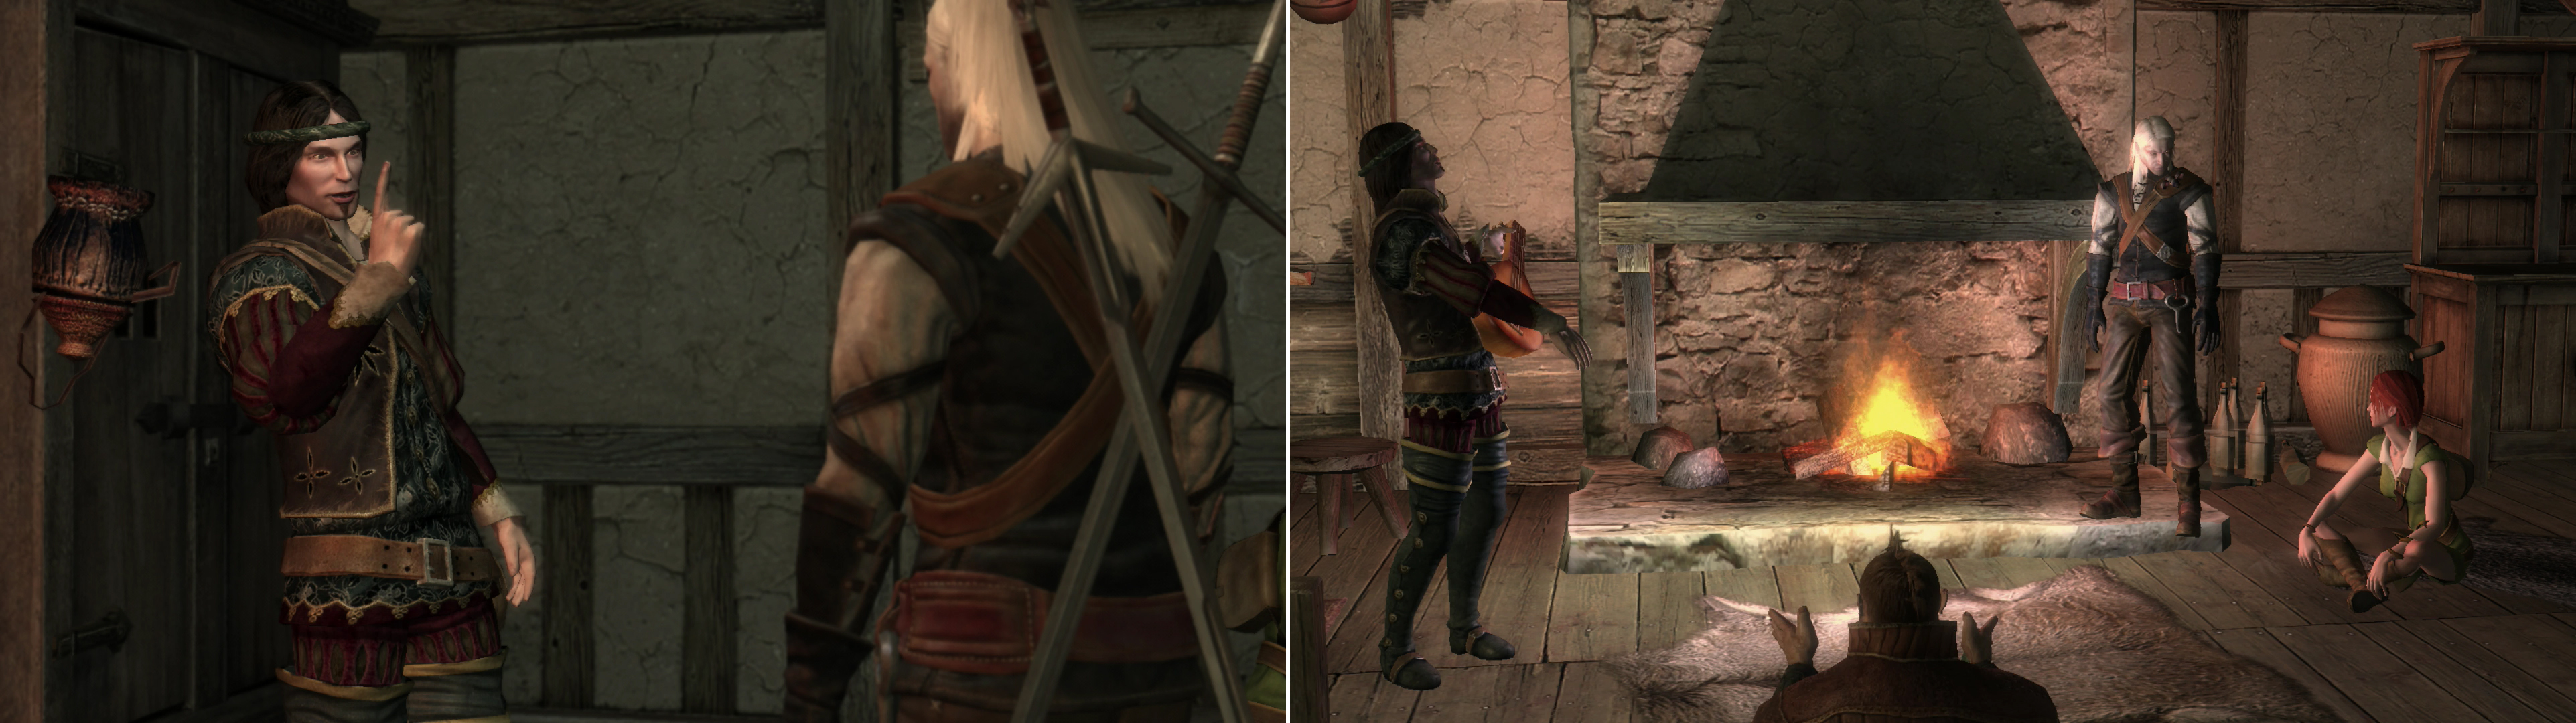 At Shani's party you'll meet Dandelion-poet, spy, scoundrel, and another forgotten friend from Geralt's past (left). Chat everybody up, be merry, and be sure to give Shani some Red Roses afterwards to thank her (right).